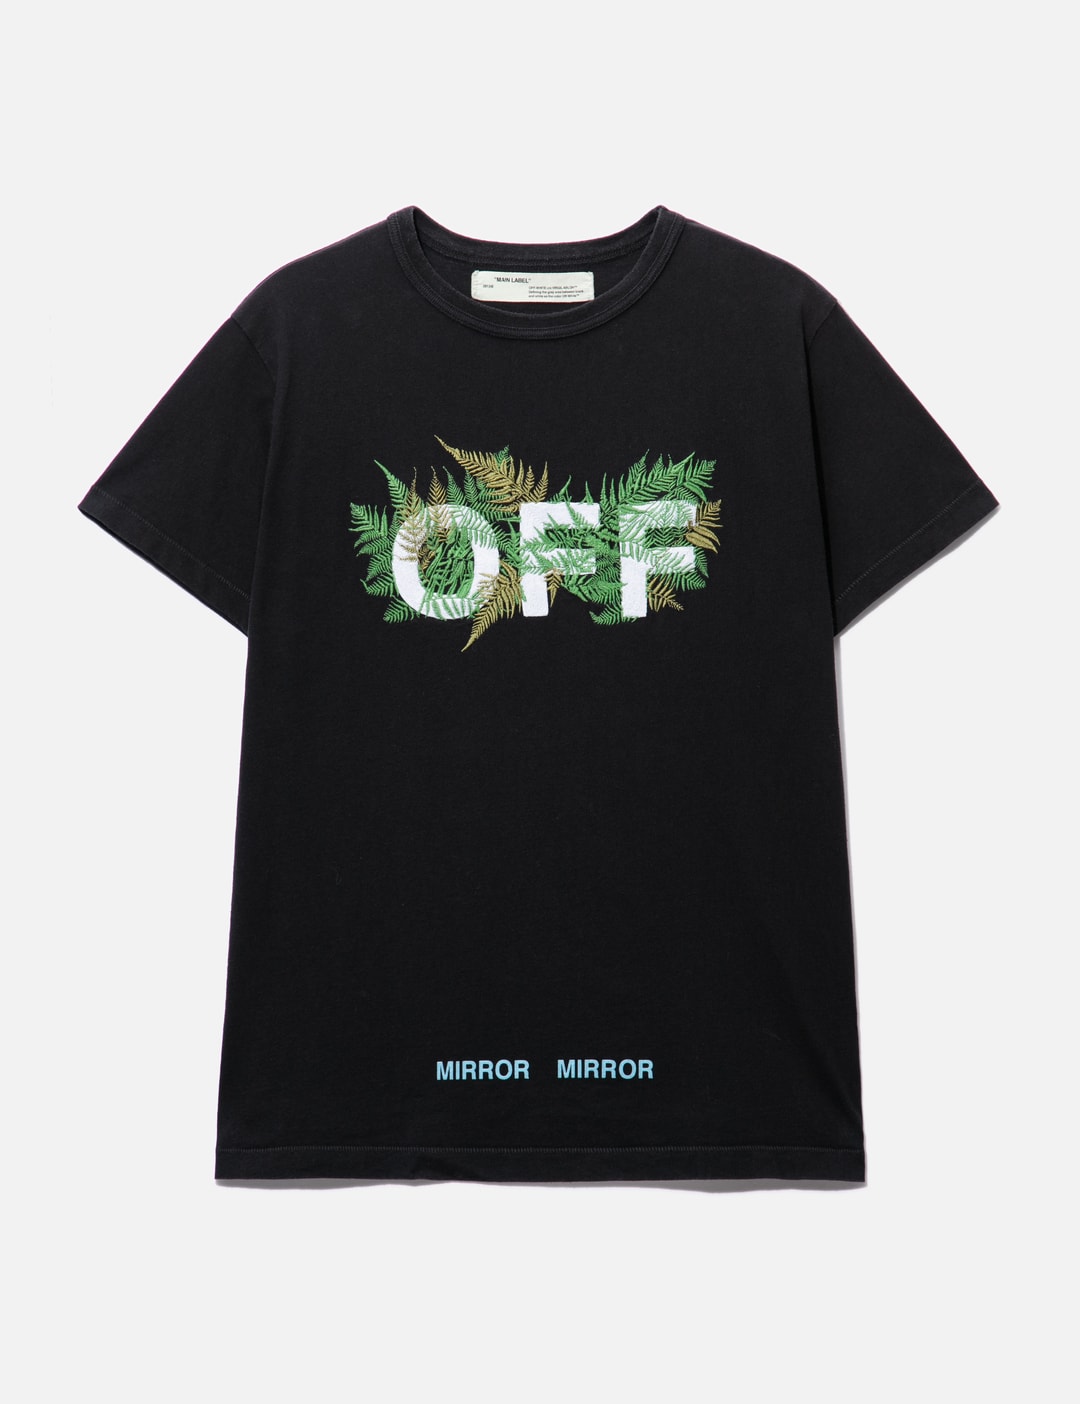 Off-White™ - OFF WHITE™ MIRROR MIRROR MEN | HBX - Globally Curated Fashion and Lifestyle Hypebeast